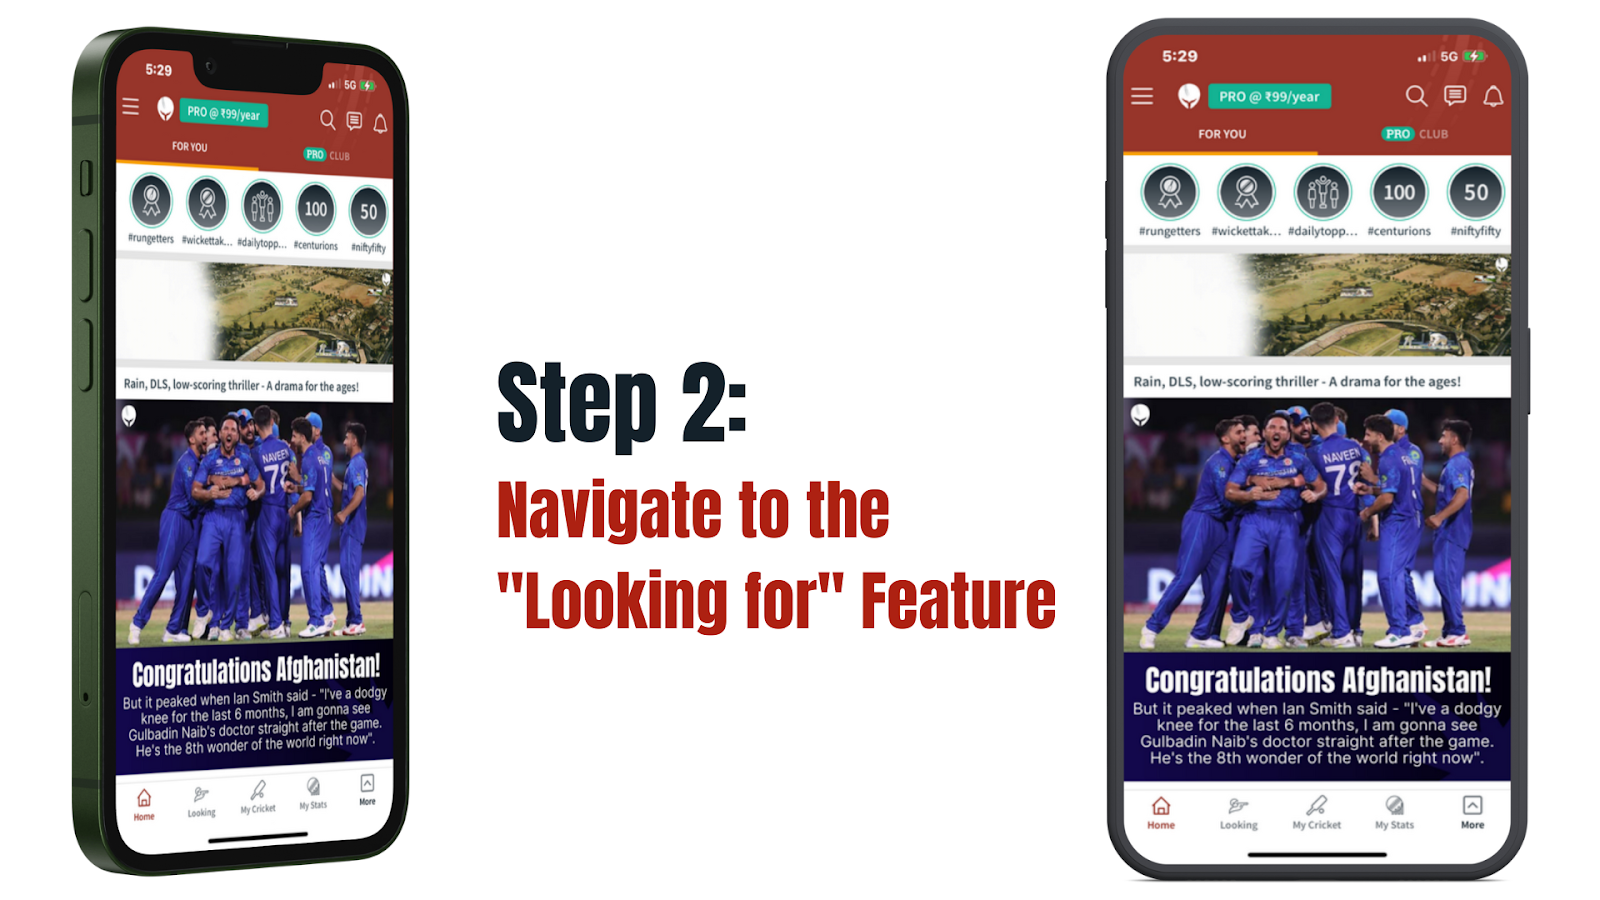 Navigate to the "Looking for" Feature